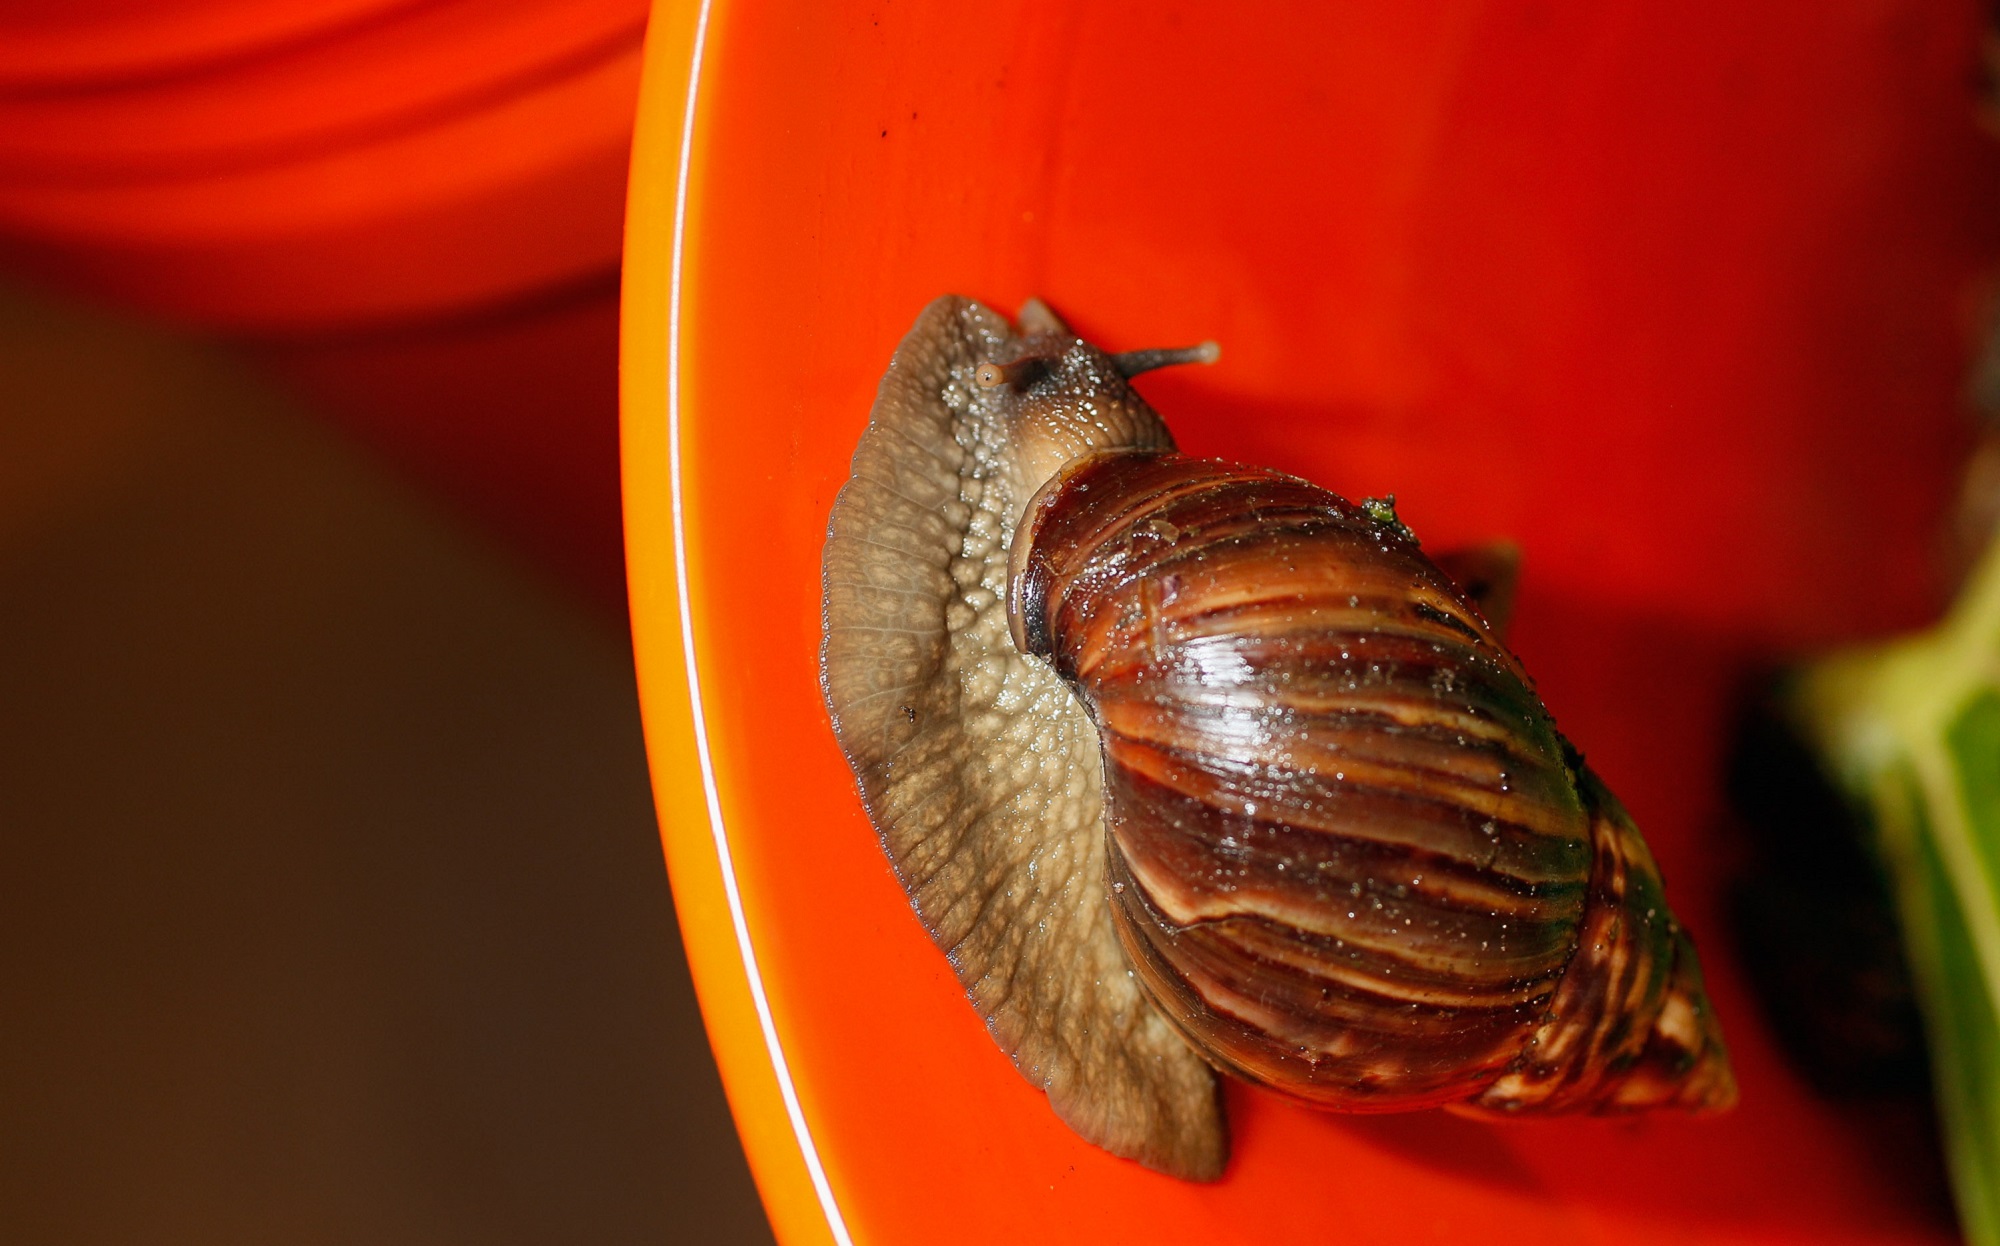 Giant African land snail, an invasive species in Florida, on a red bucket